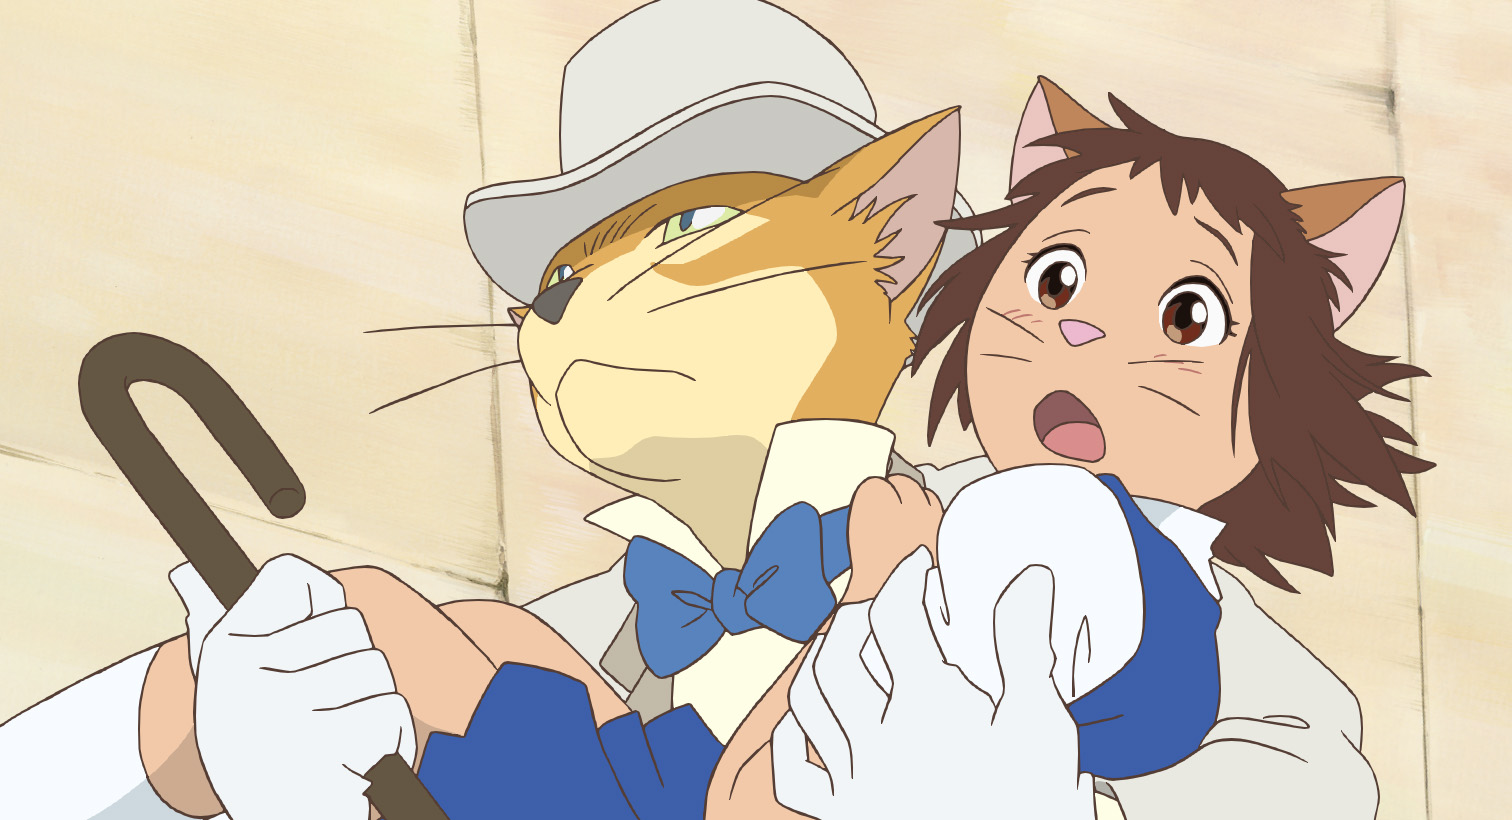 The Baron, a cat who walks on two legs and wears a top hat and a fine set of gentlemanly human clothing, carries a half-transformed Haru like a princess in a scene from The Cat Returns theatrical anime film.